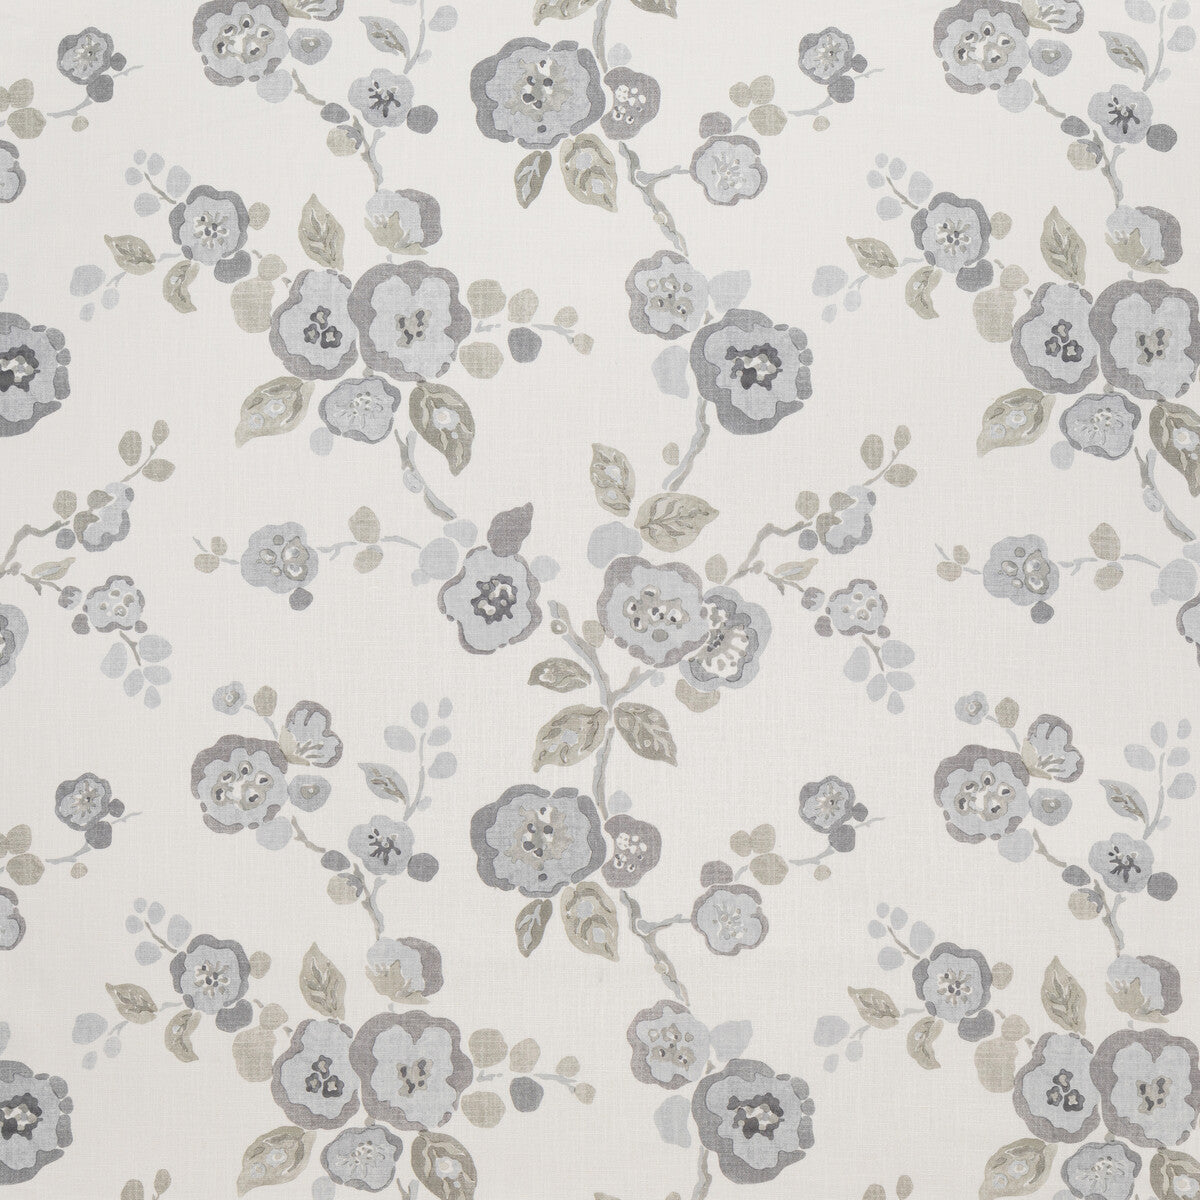 Hana fabric in dove color - pattern BFC-3706.1101.0 - by Lee Jofa in the Blithfield Eden collection